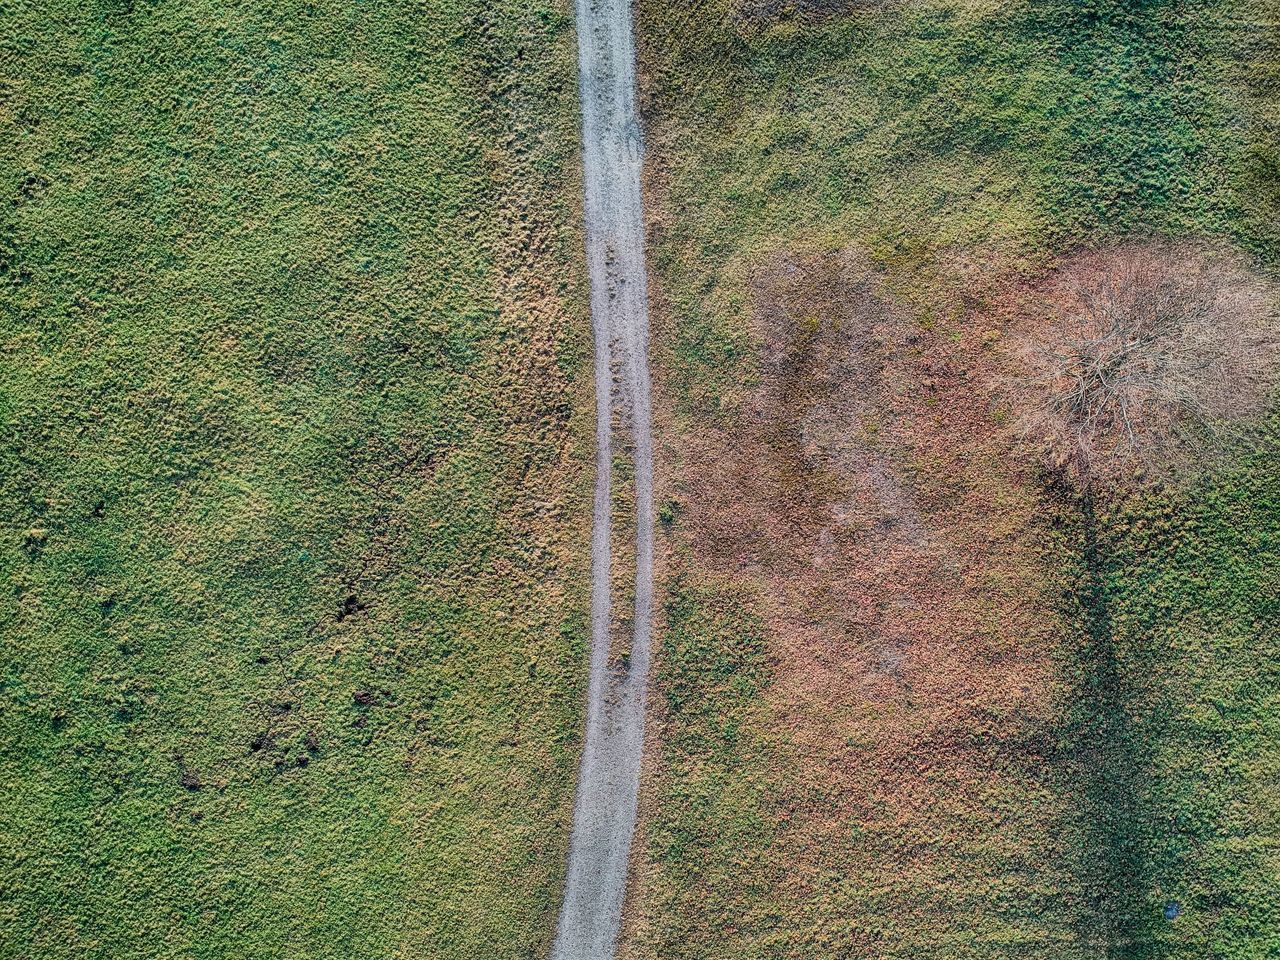 HIGH ANGLE VIEW OF ROAD AMIDST LAND